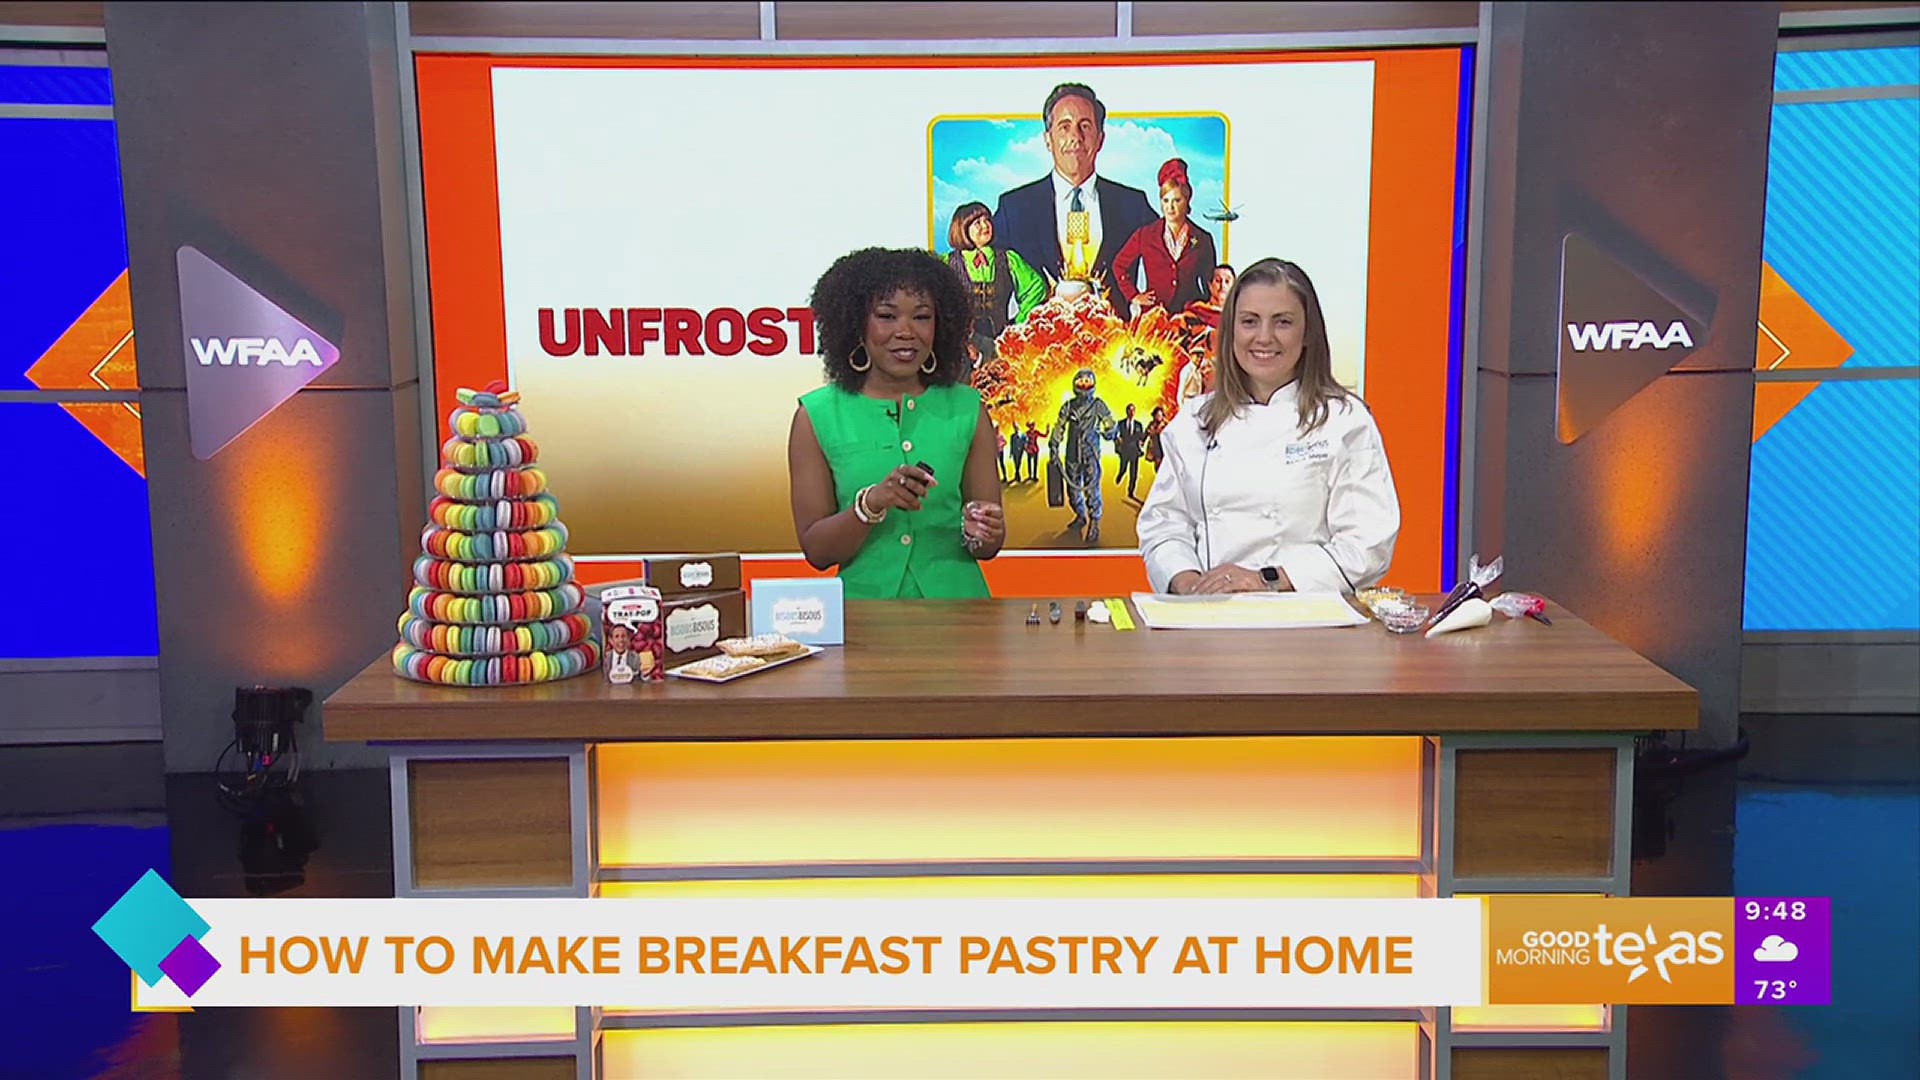 Andrea Meyer of Bisous Bisous Patisserie shares her strawberry breakfast pastry recipe ahead of the debut of "Unfrosted" starring Jerry Seinfeld on Netflix May 3.